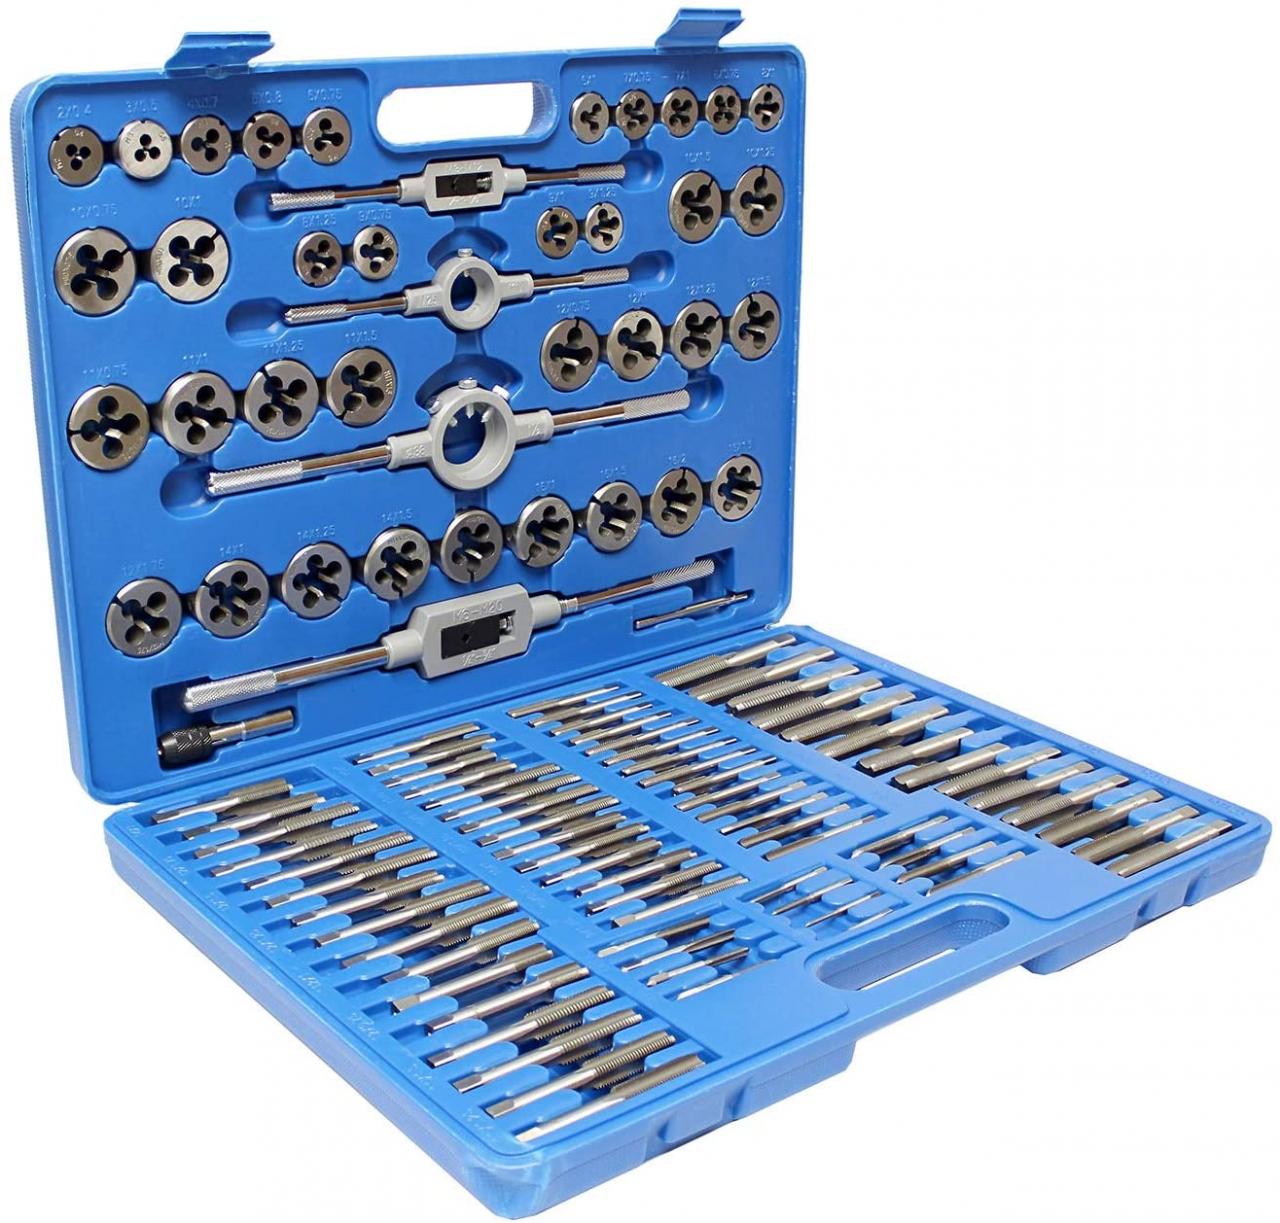 Buy ABN Large Tap and Die Set Metric Tap and Die Kit Rethreading Tool Kit  Thread Maker Hole Threader 110-Piece Set, Metric Online in Romania.  B07SQGQNT2